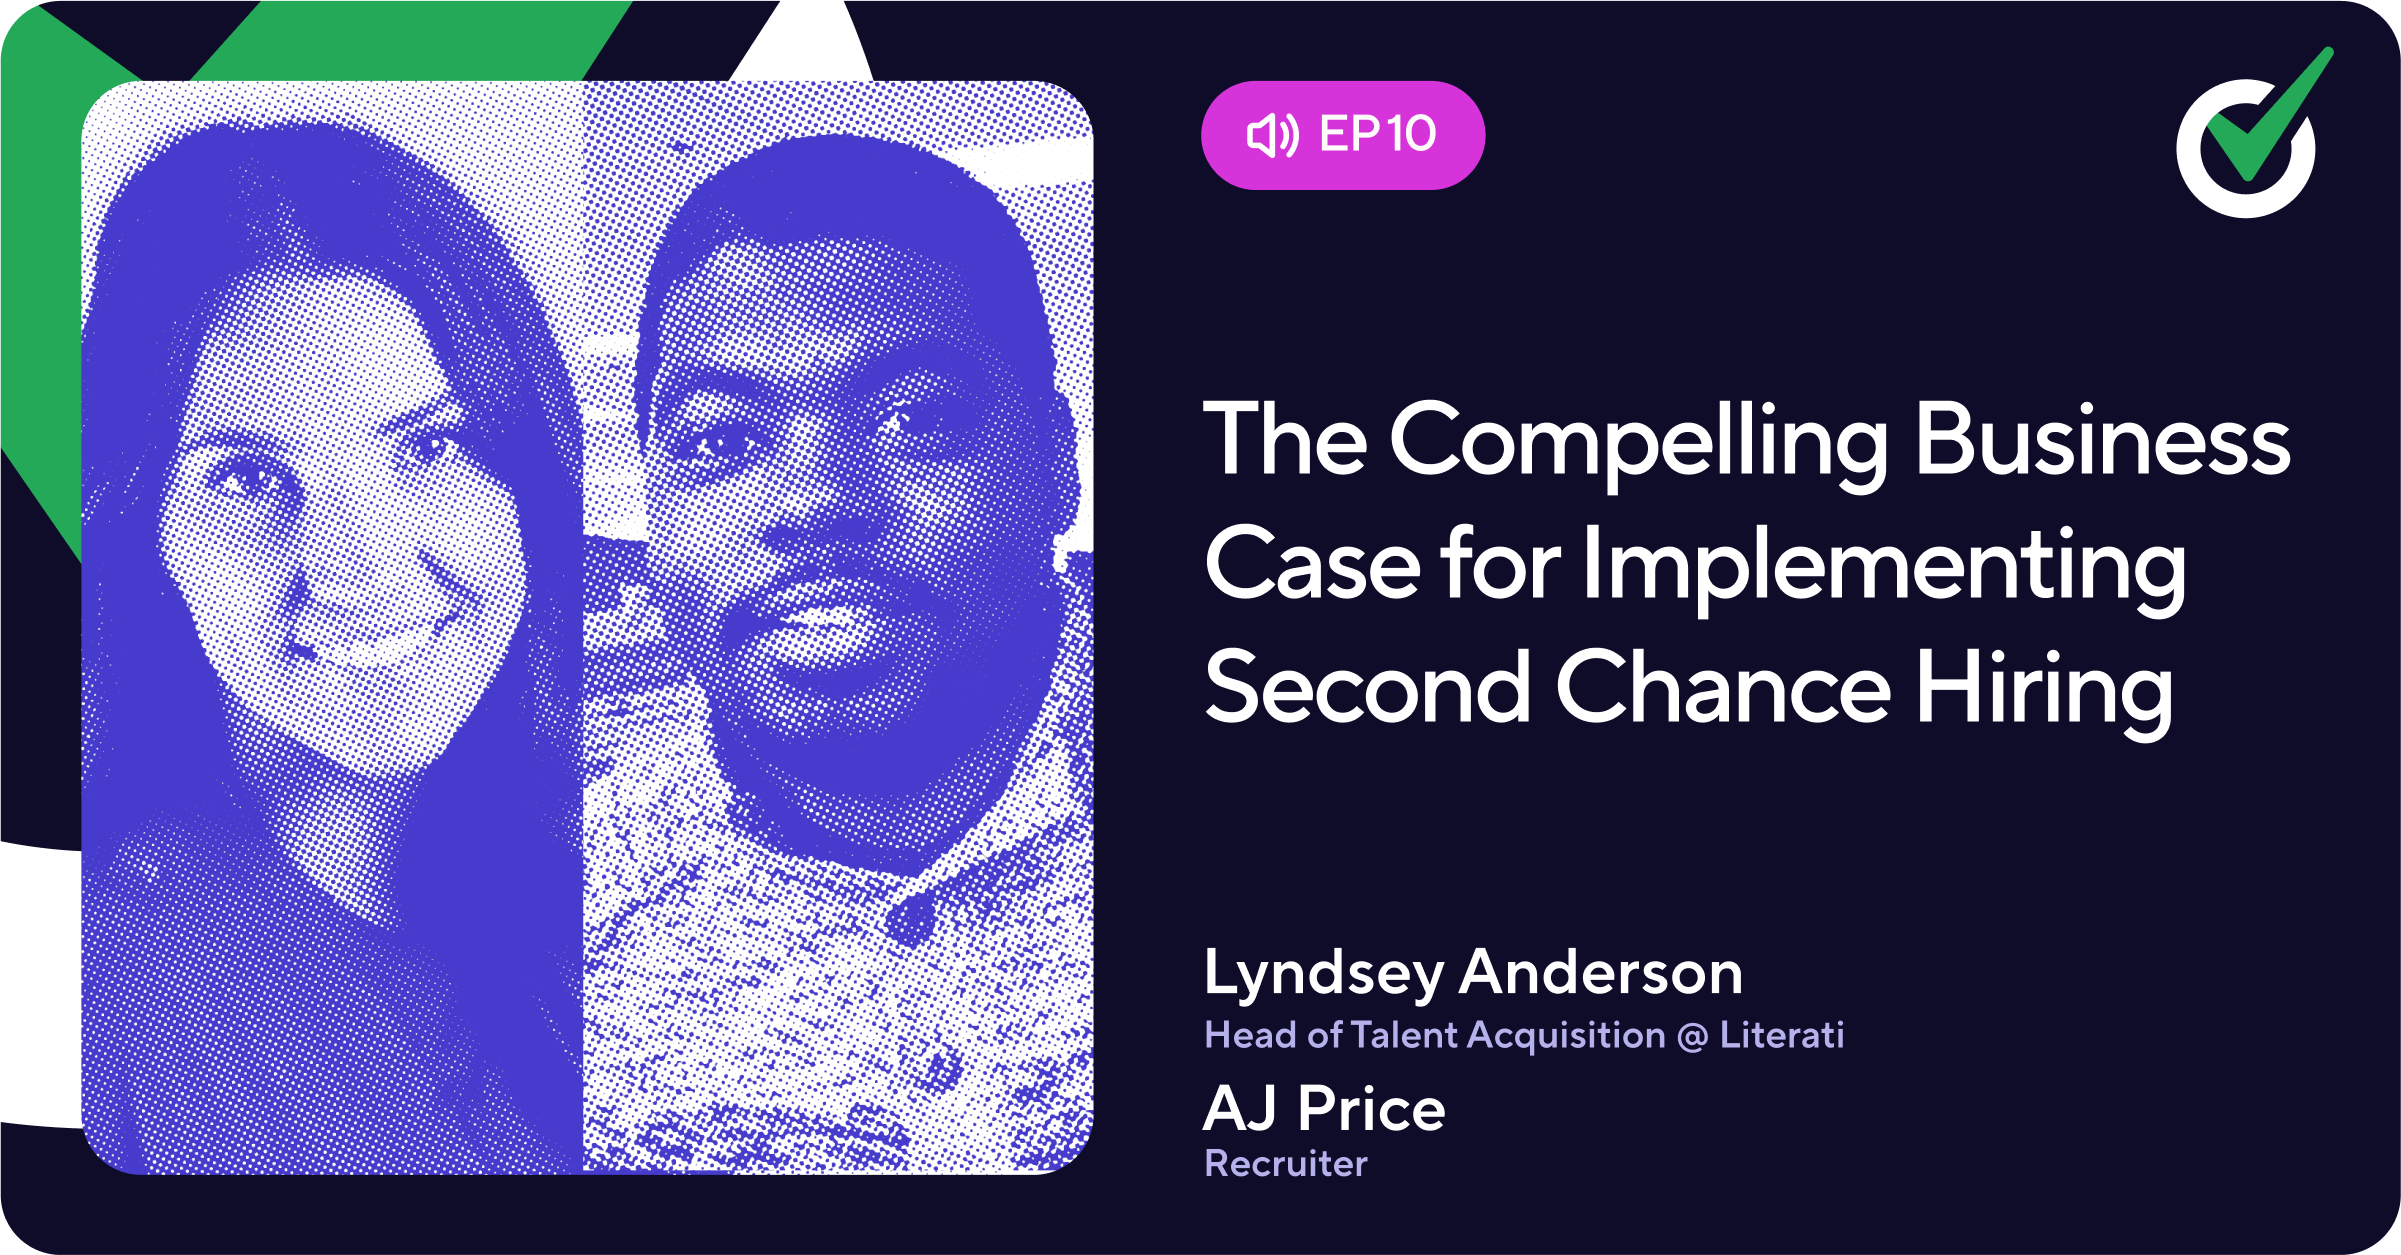 Episode 10 - The Compelling Business Case for Implementing Second Chance Hiring